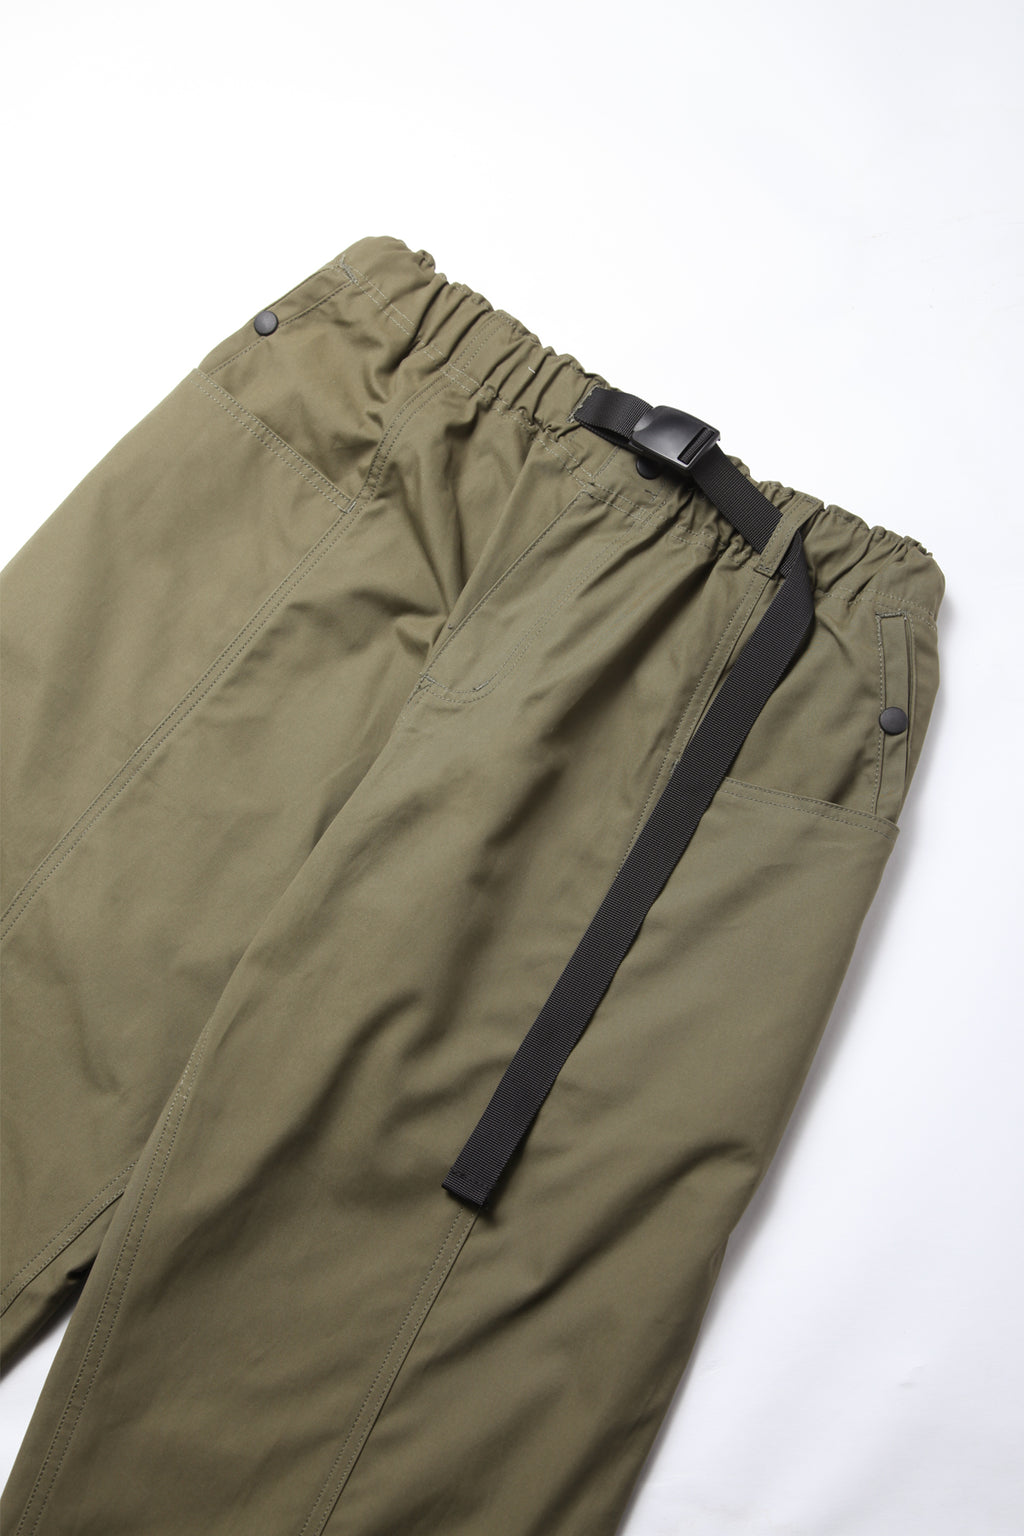 TRS - Loose Climbing Pants - Olive